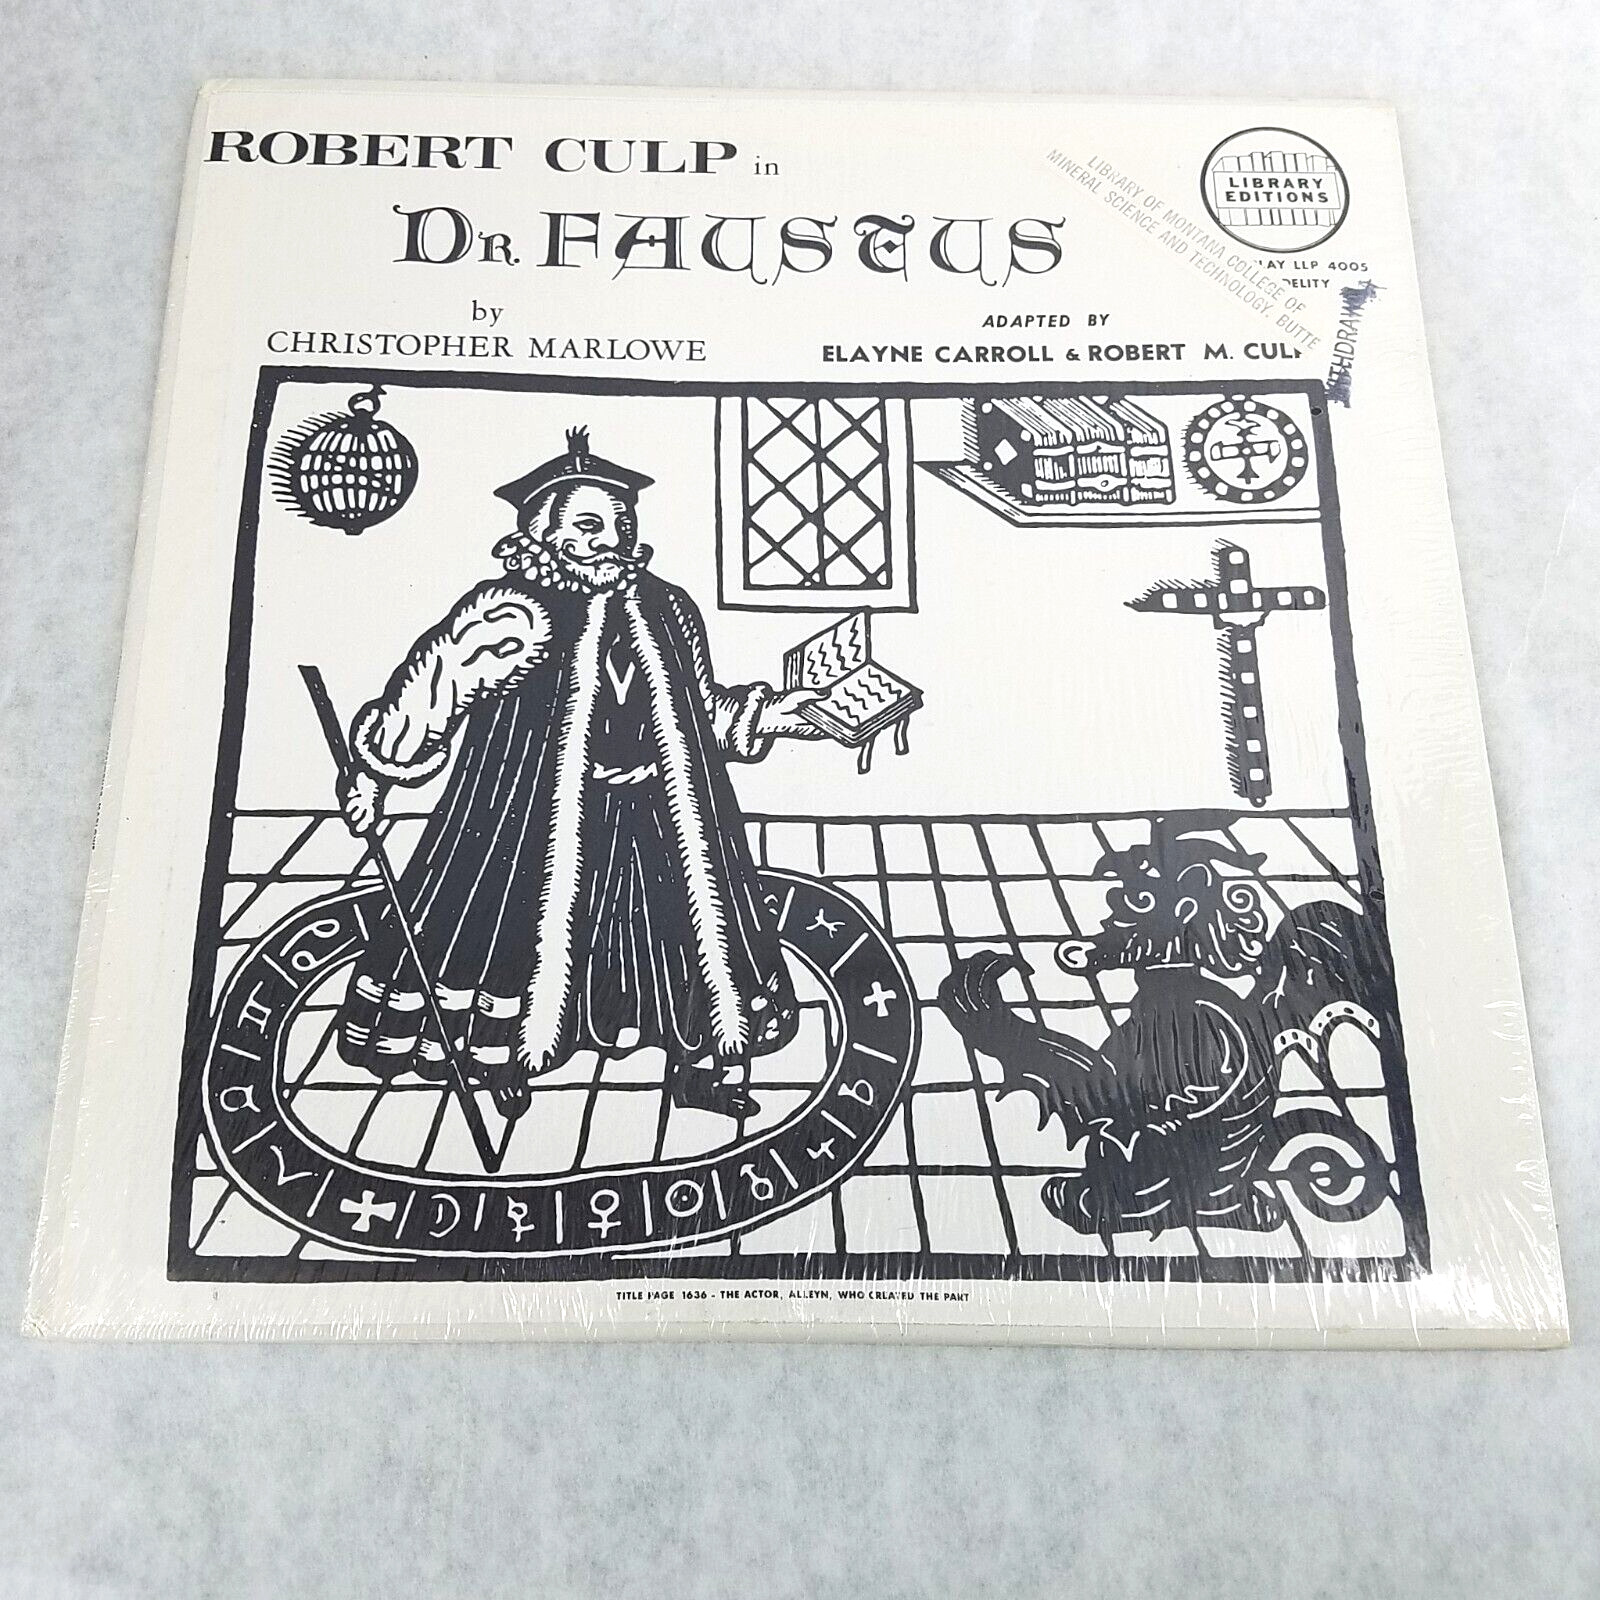 Robert Culp in DR FAUSEUS by Christopher Marlowe Vinyl Record LP - RARE